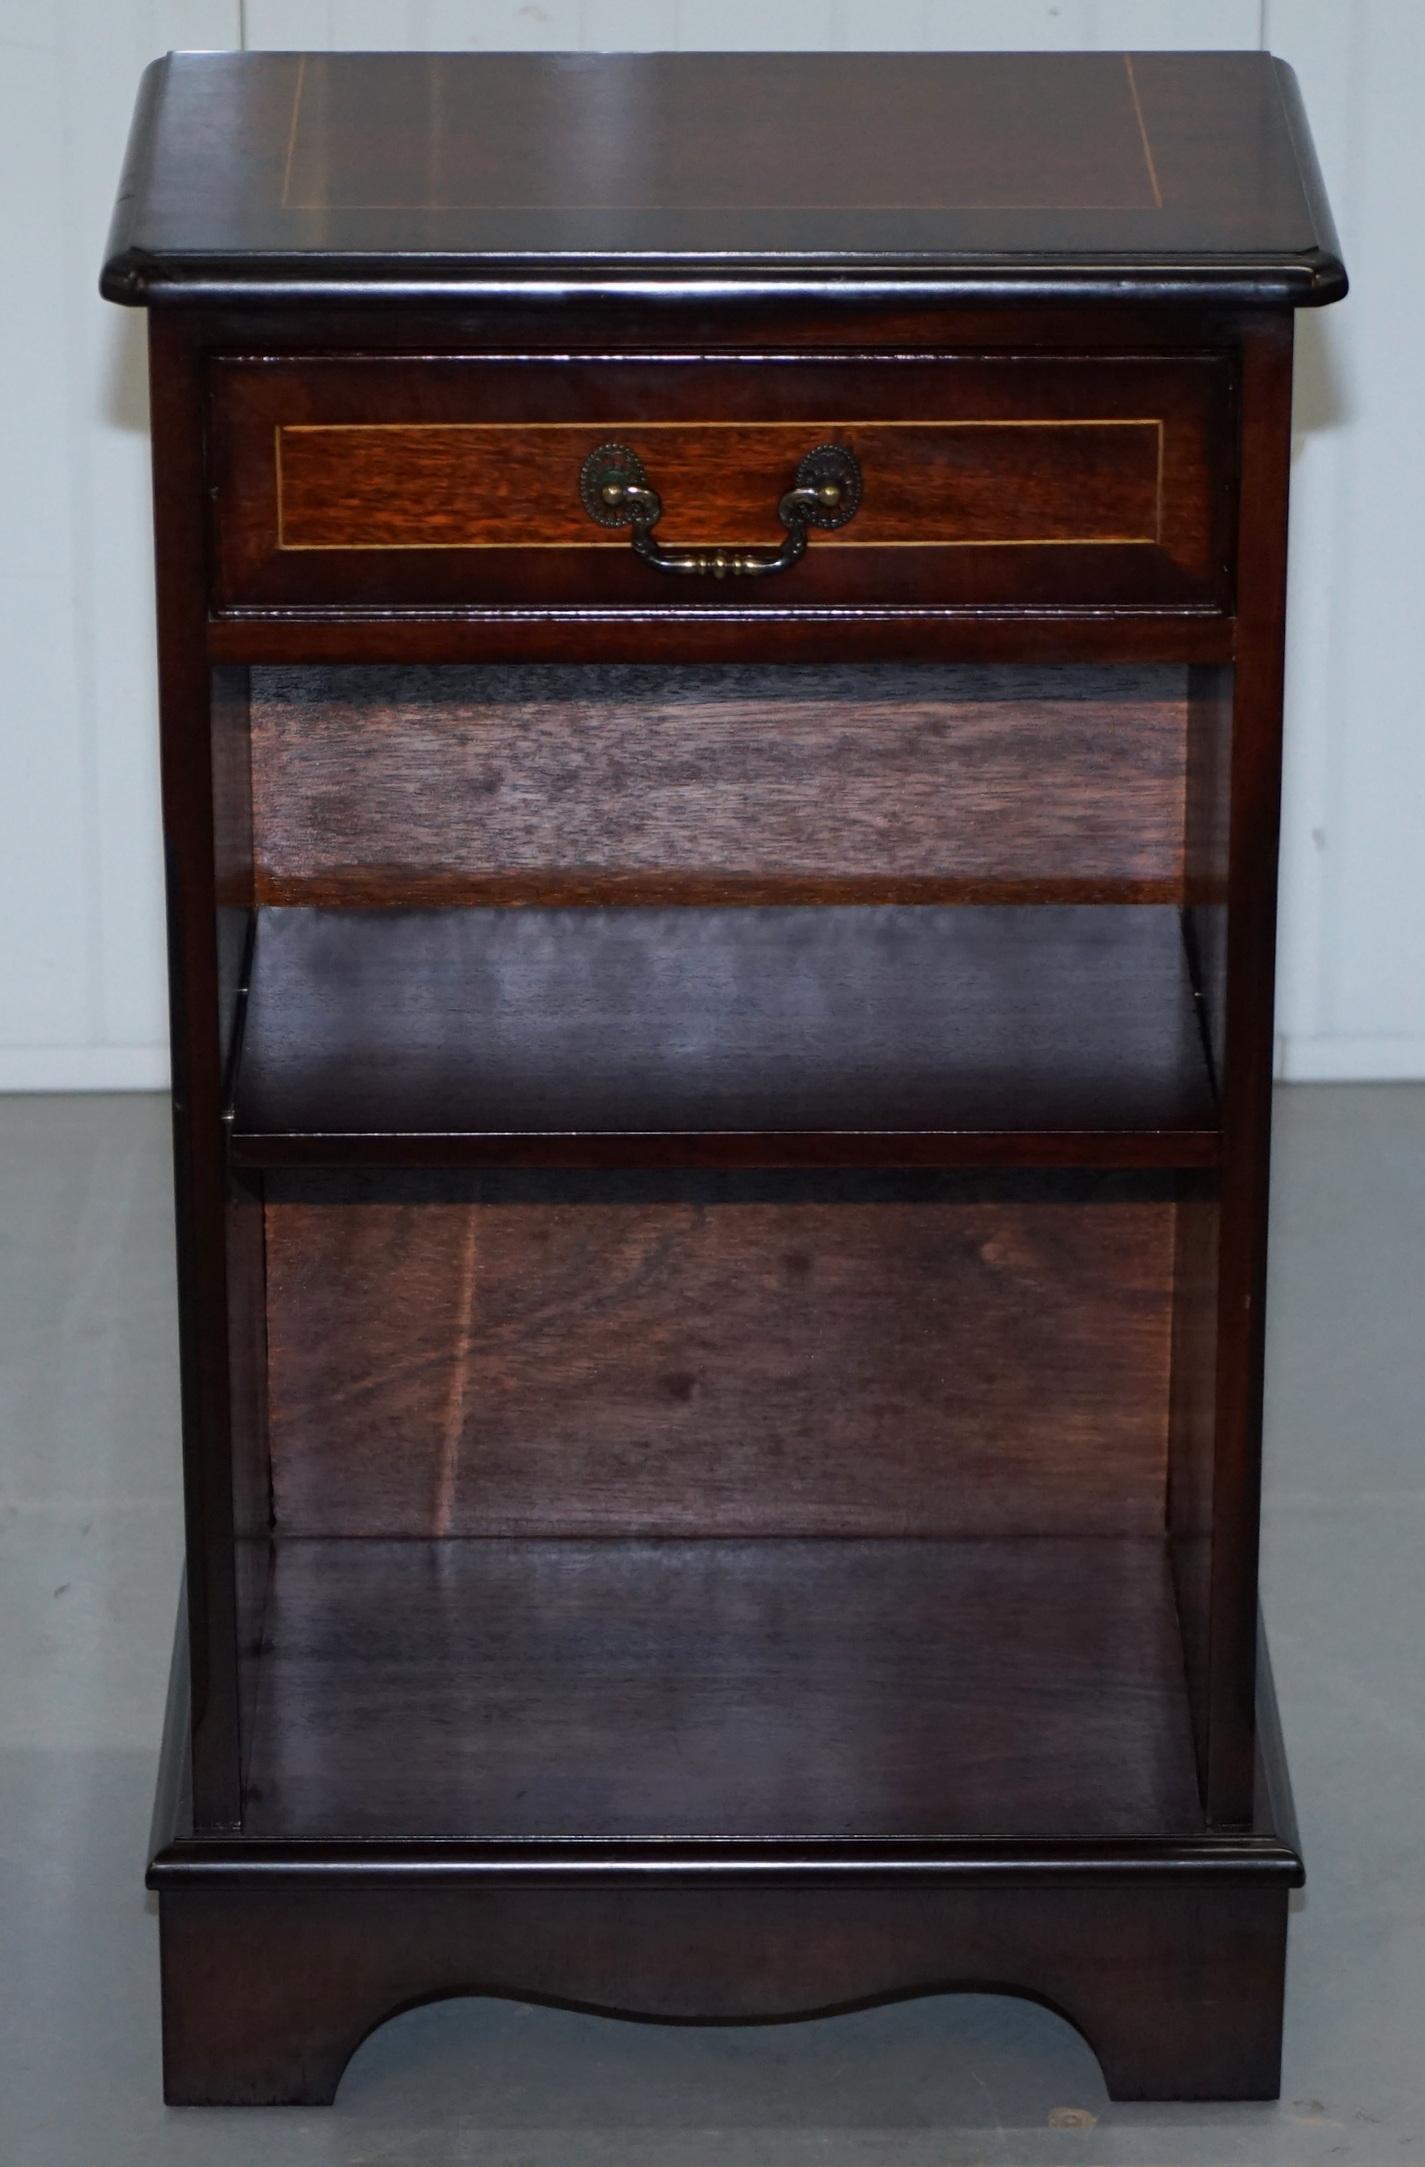 We are delighted to offer for sale this lovely handmade in England Flamed Mahogany small side table sized cabinet with single drawer

A good looking and functional piece of furniture, the shelf offers some bookcase or trinket storage, the single